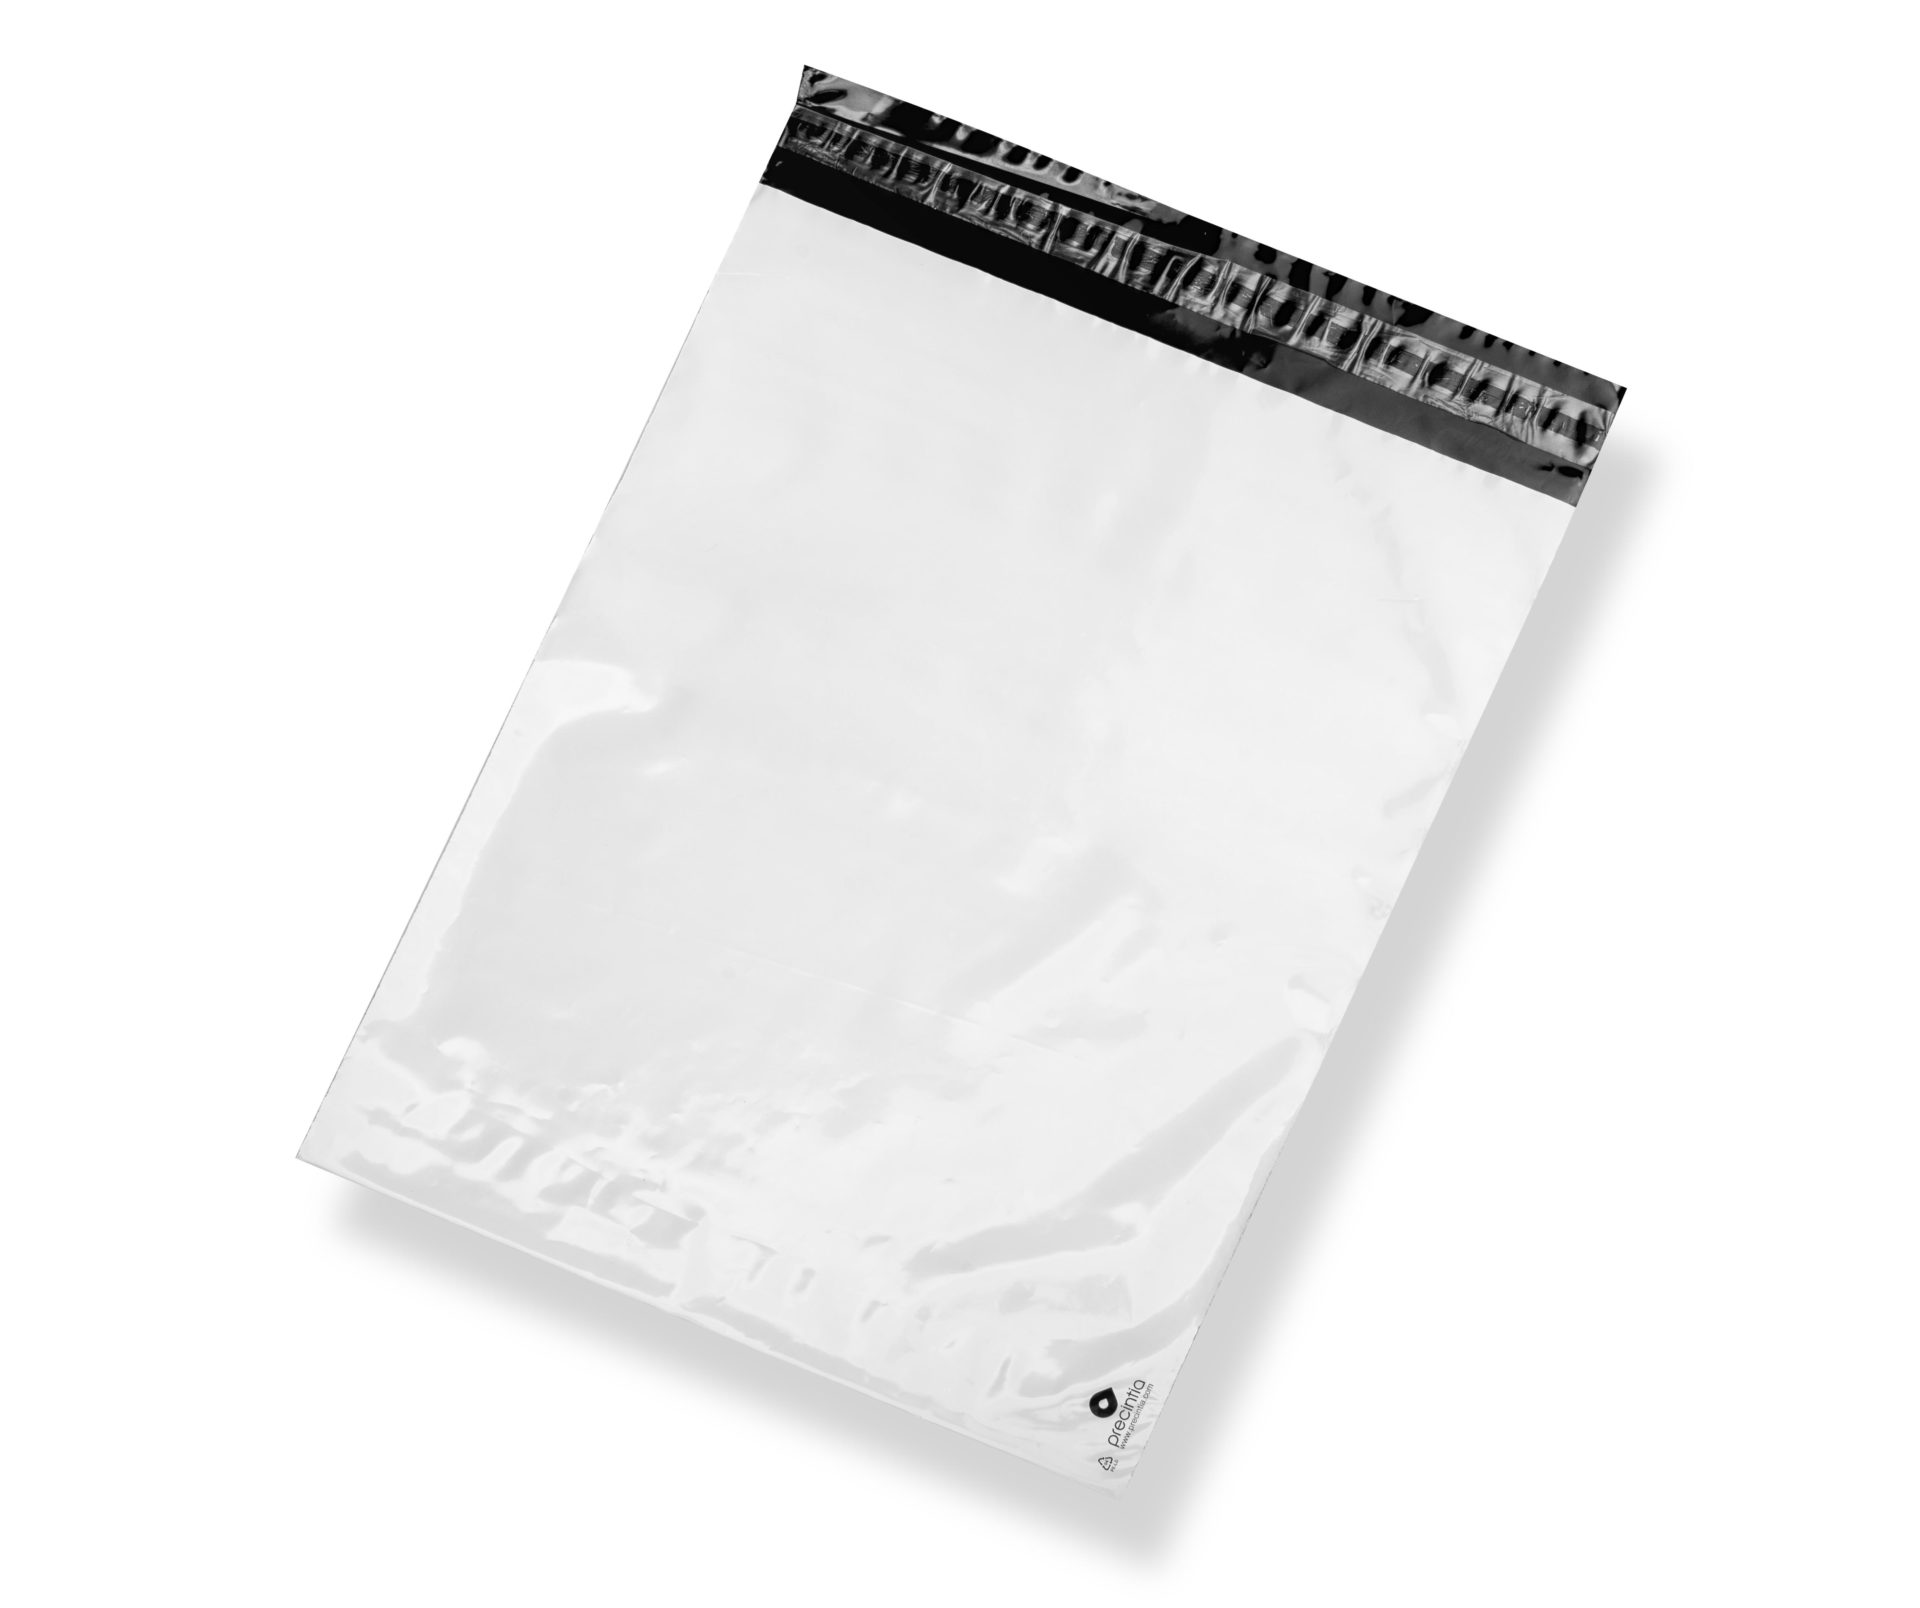 Courier envelope with permanent adhesive